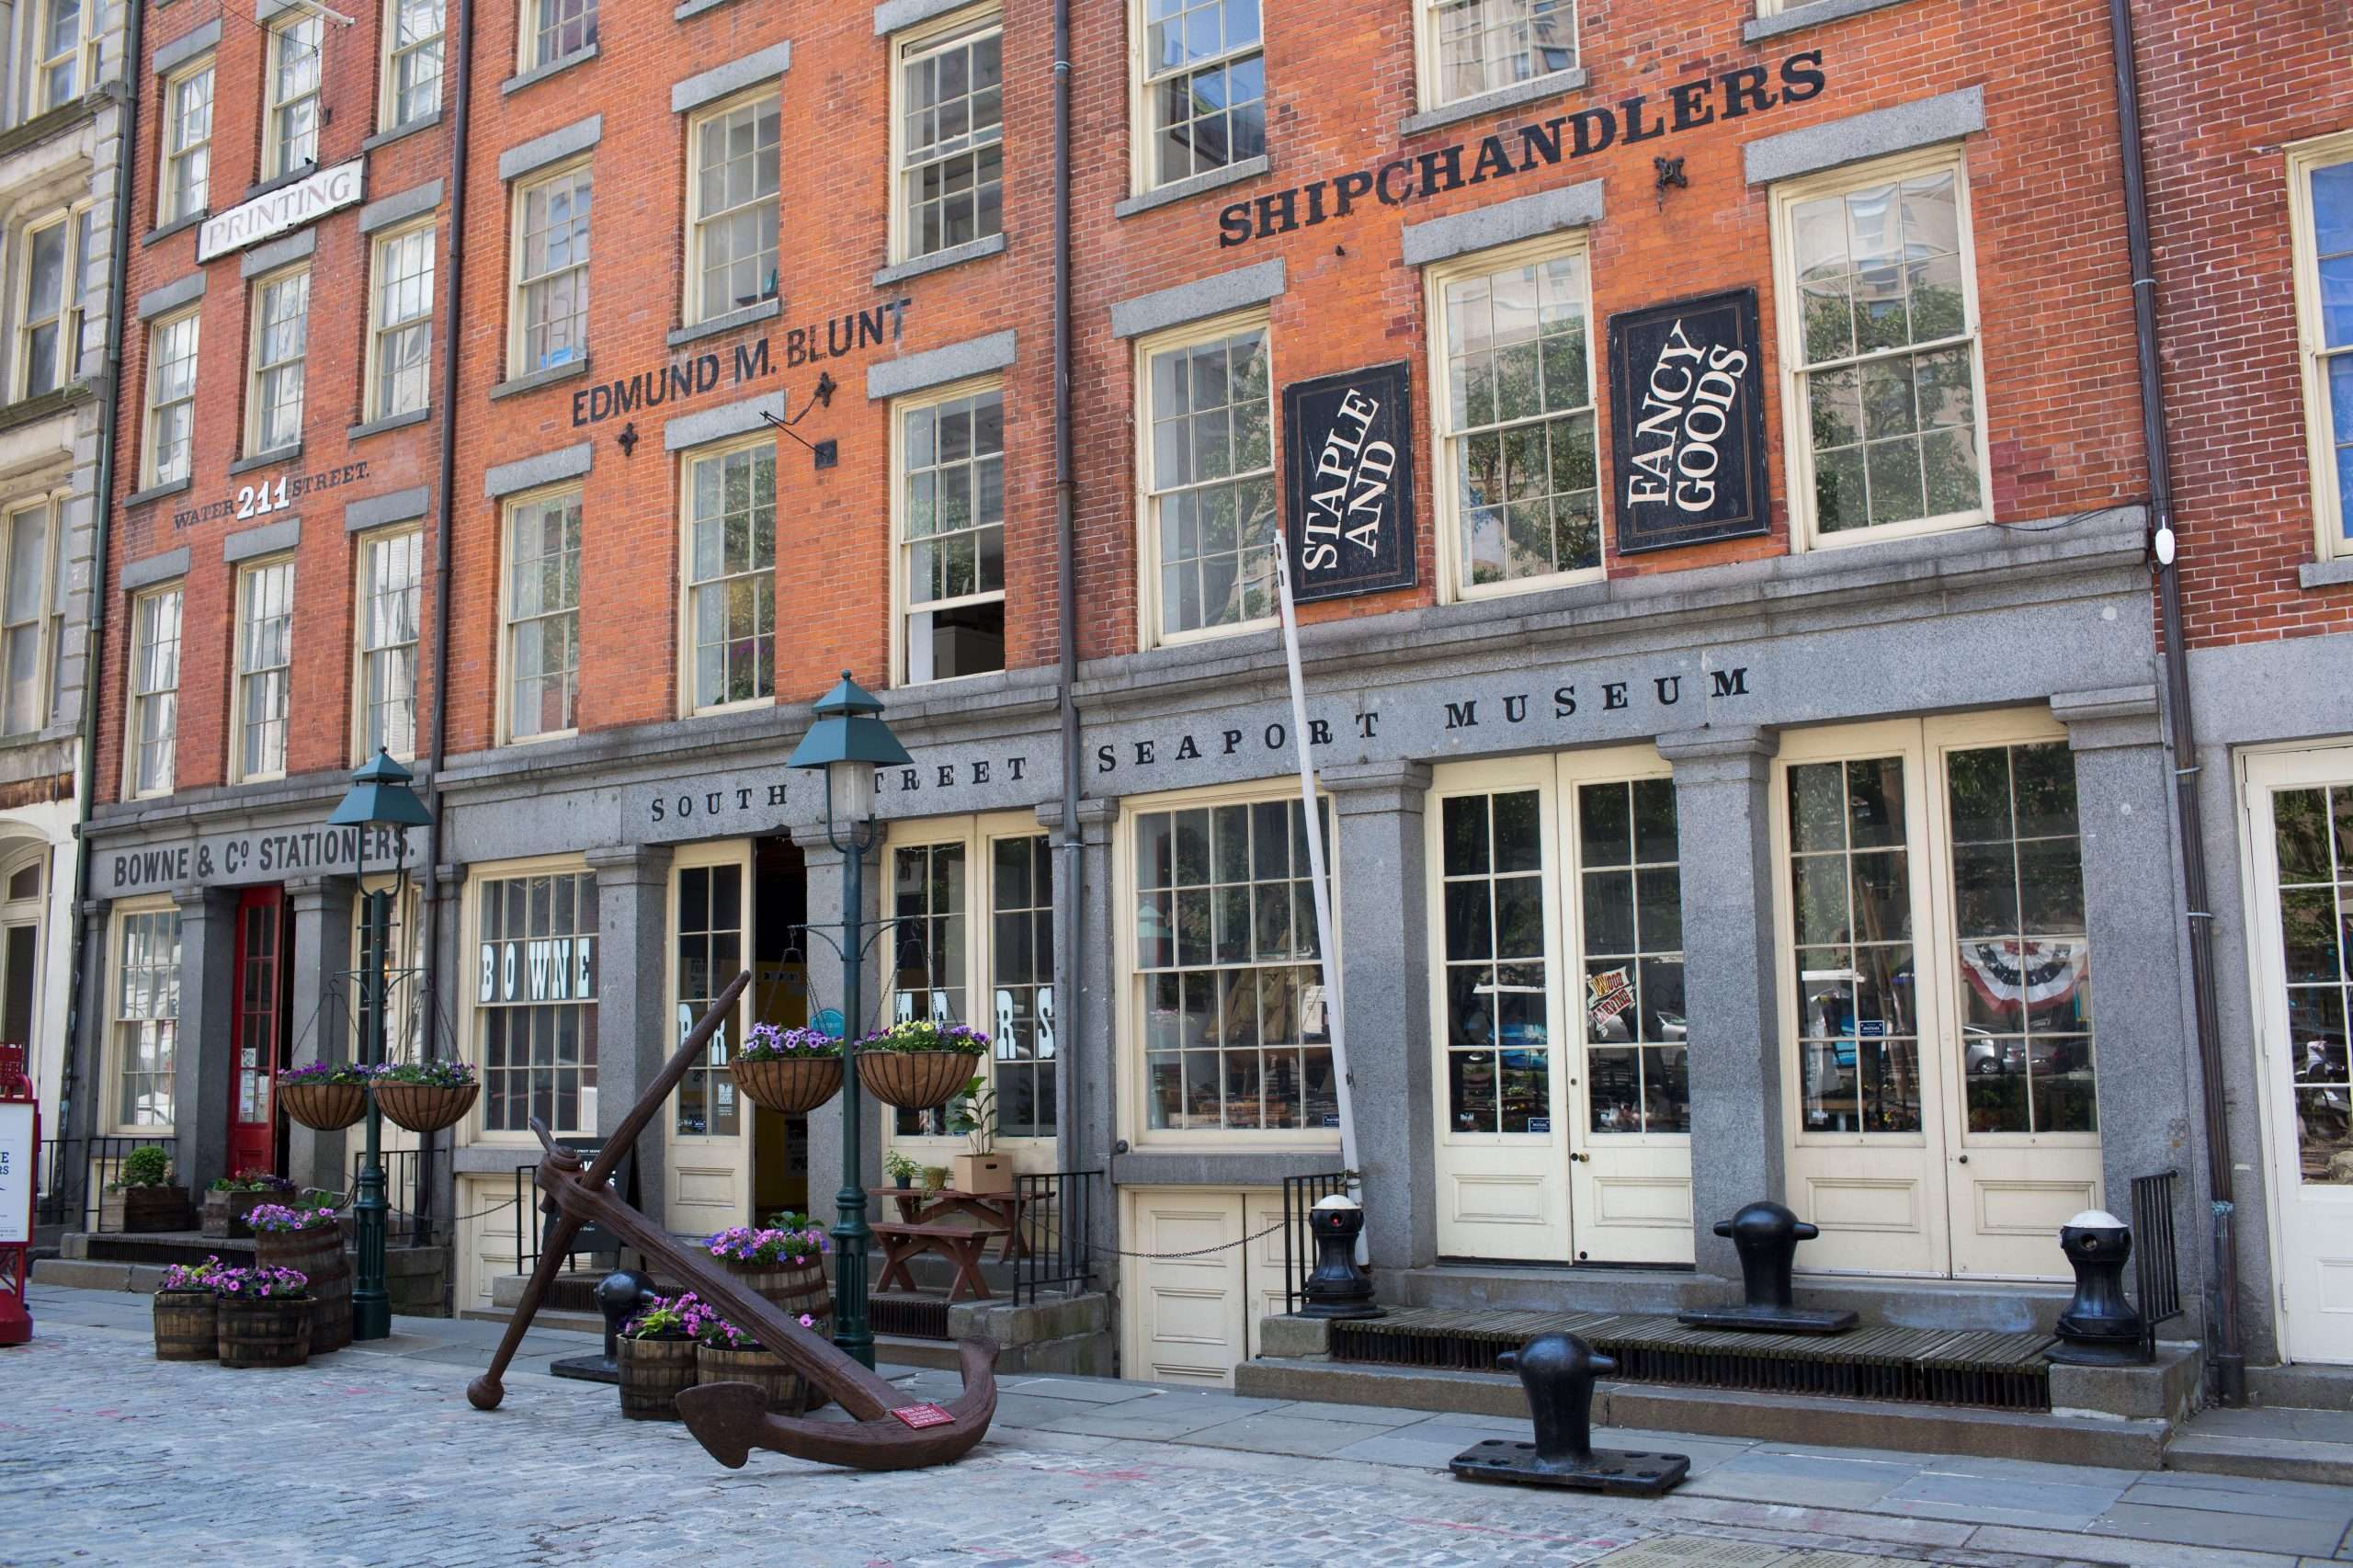 South Street Seaport Museum in New York